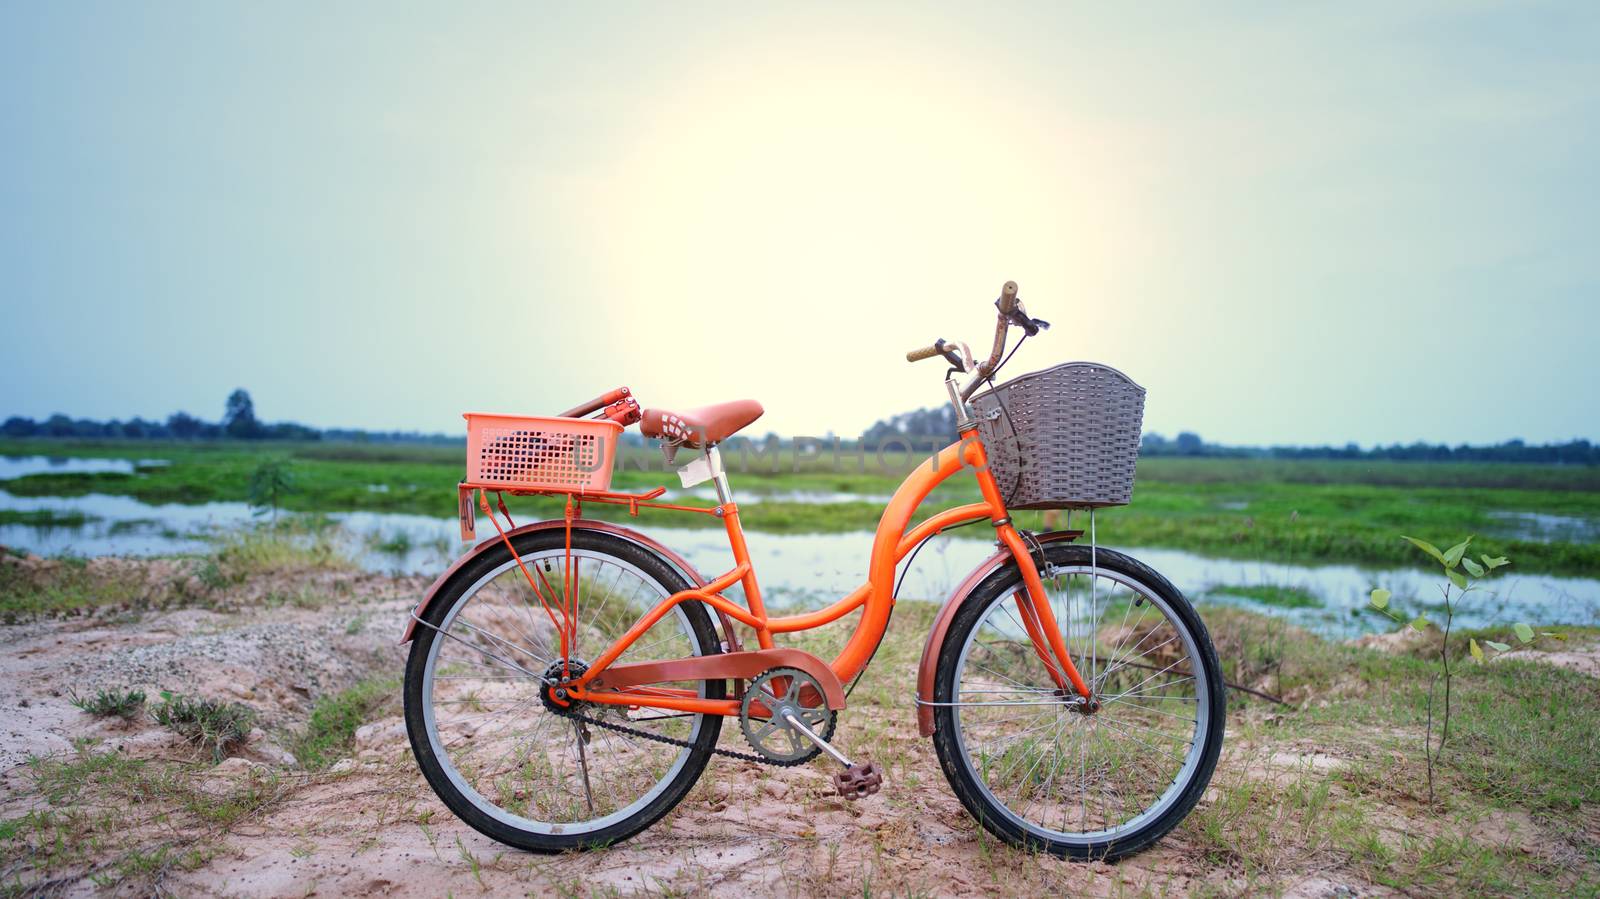 An orange retro-style bicycle with a basket for luggage, parked  by noppha80